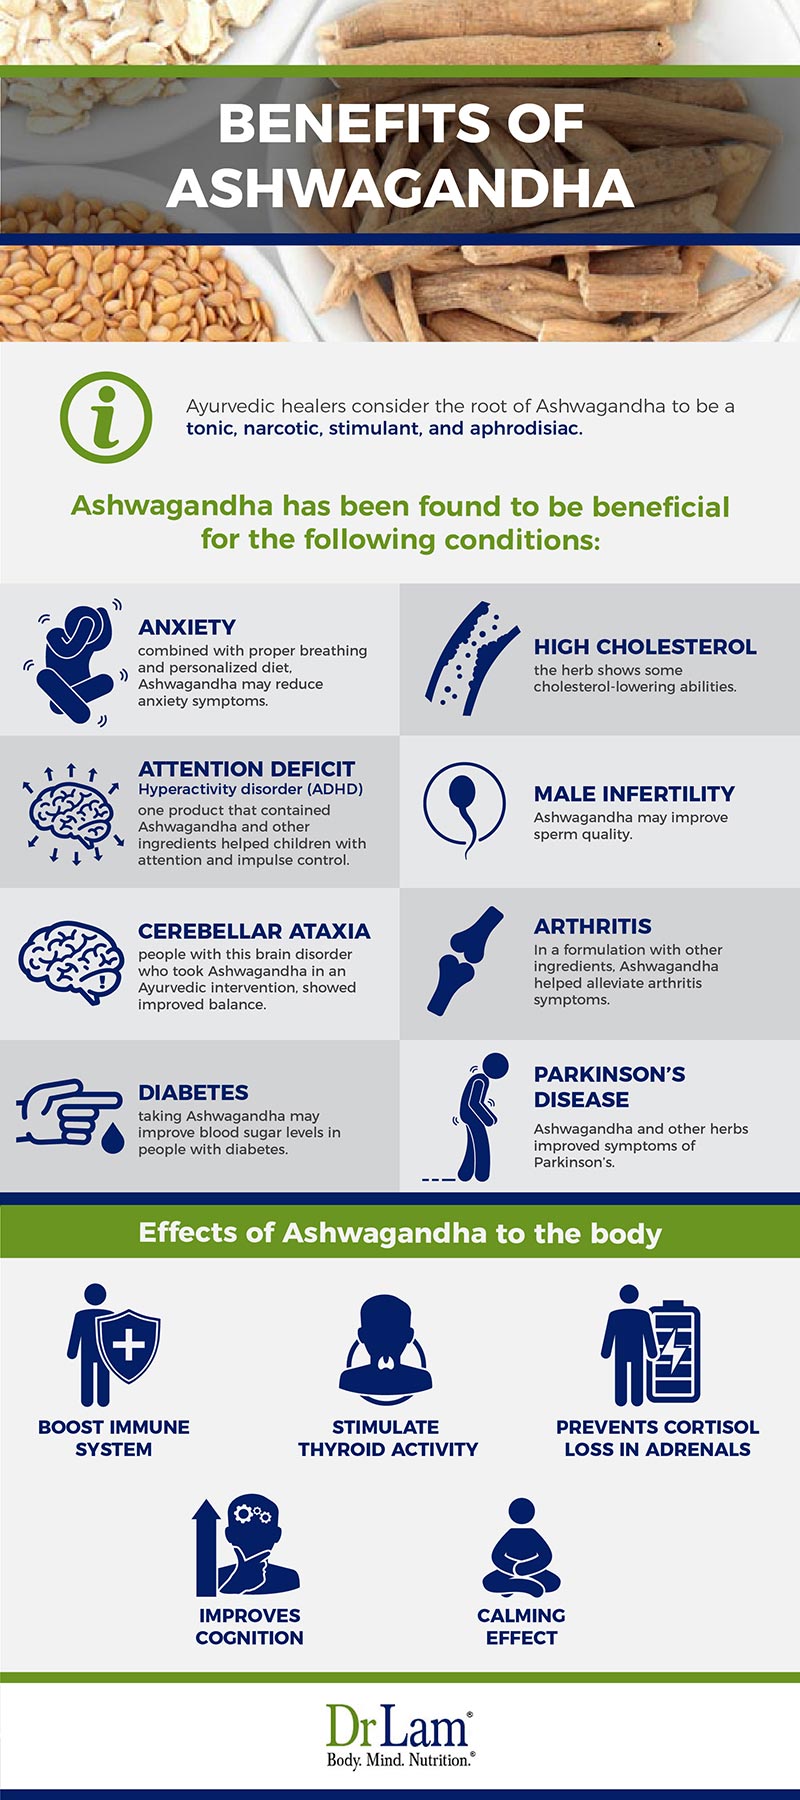 Check out this easy to understand infographic about the benefits of Ashwagandha